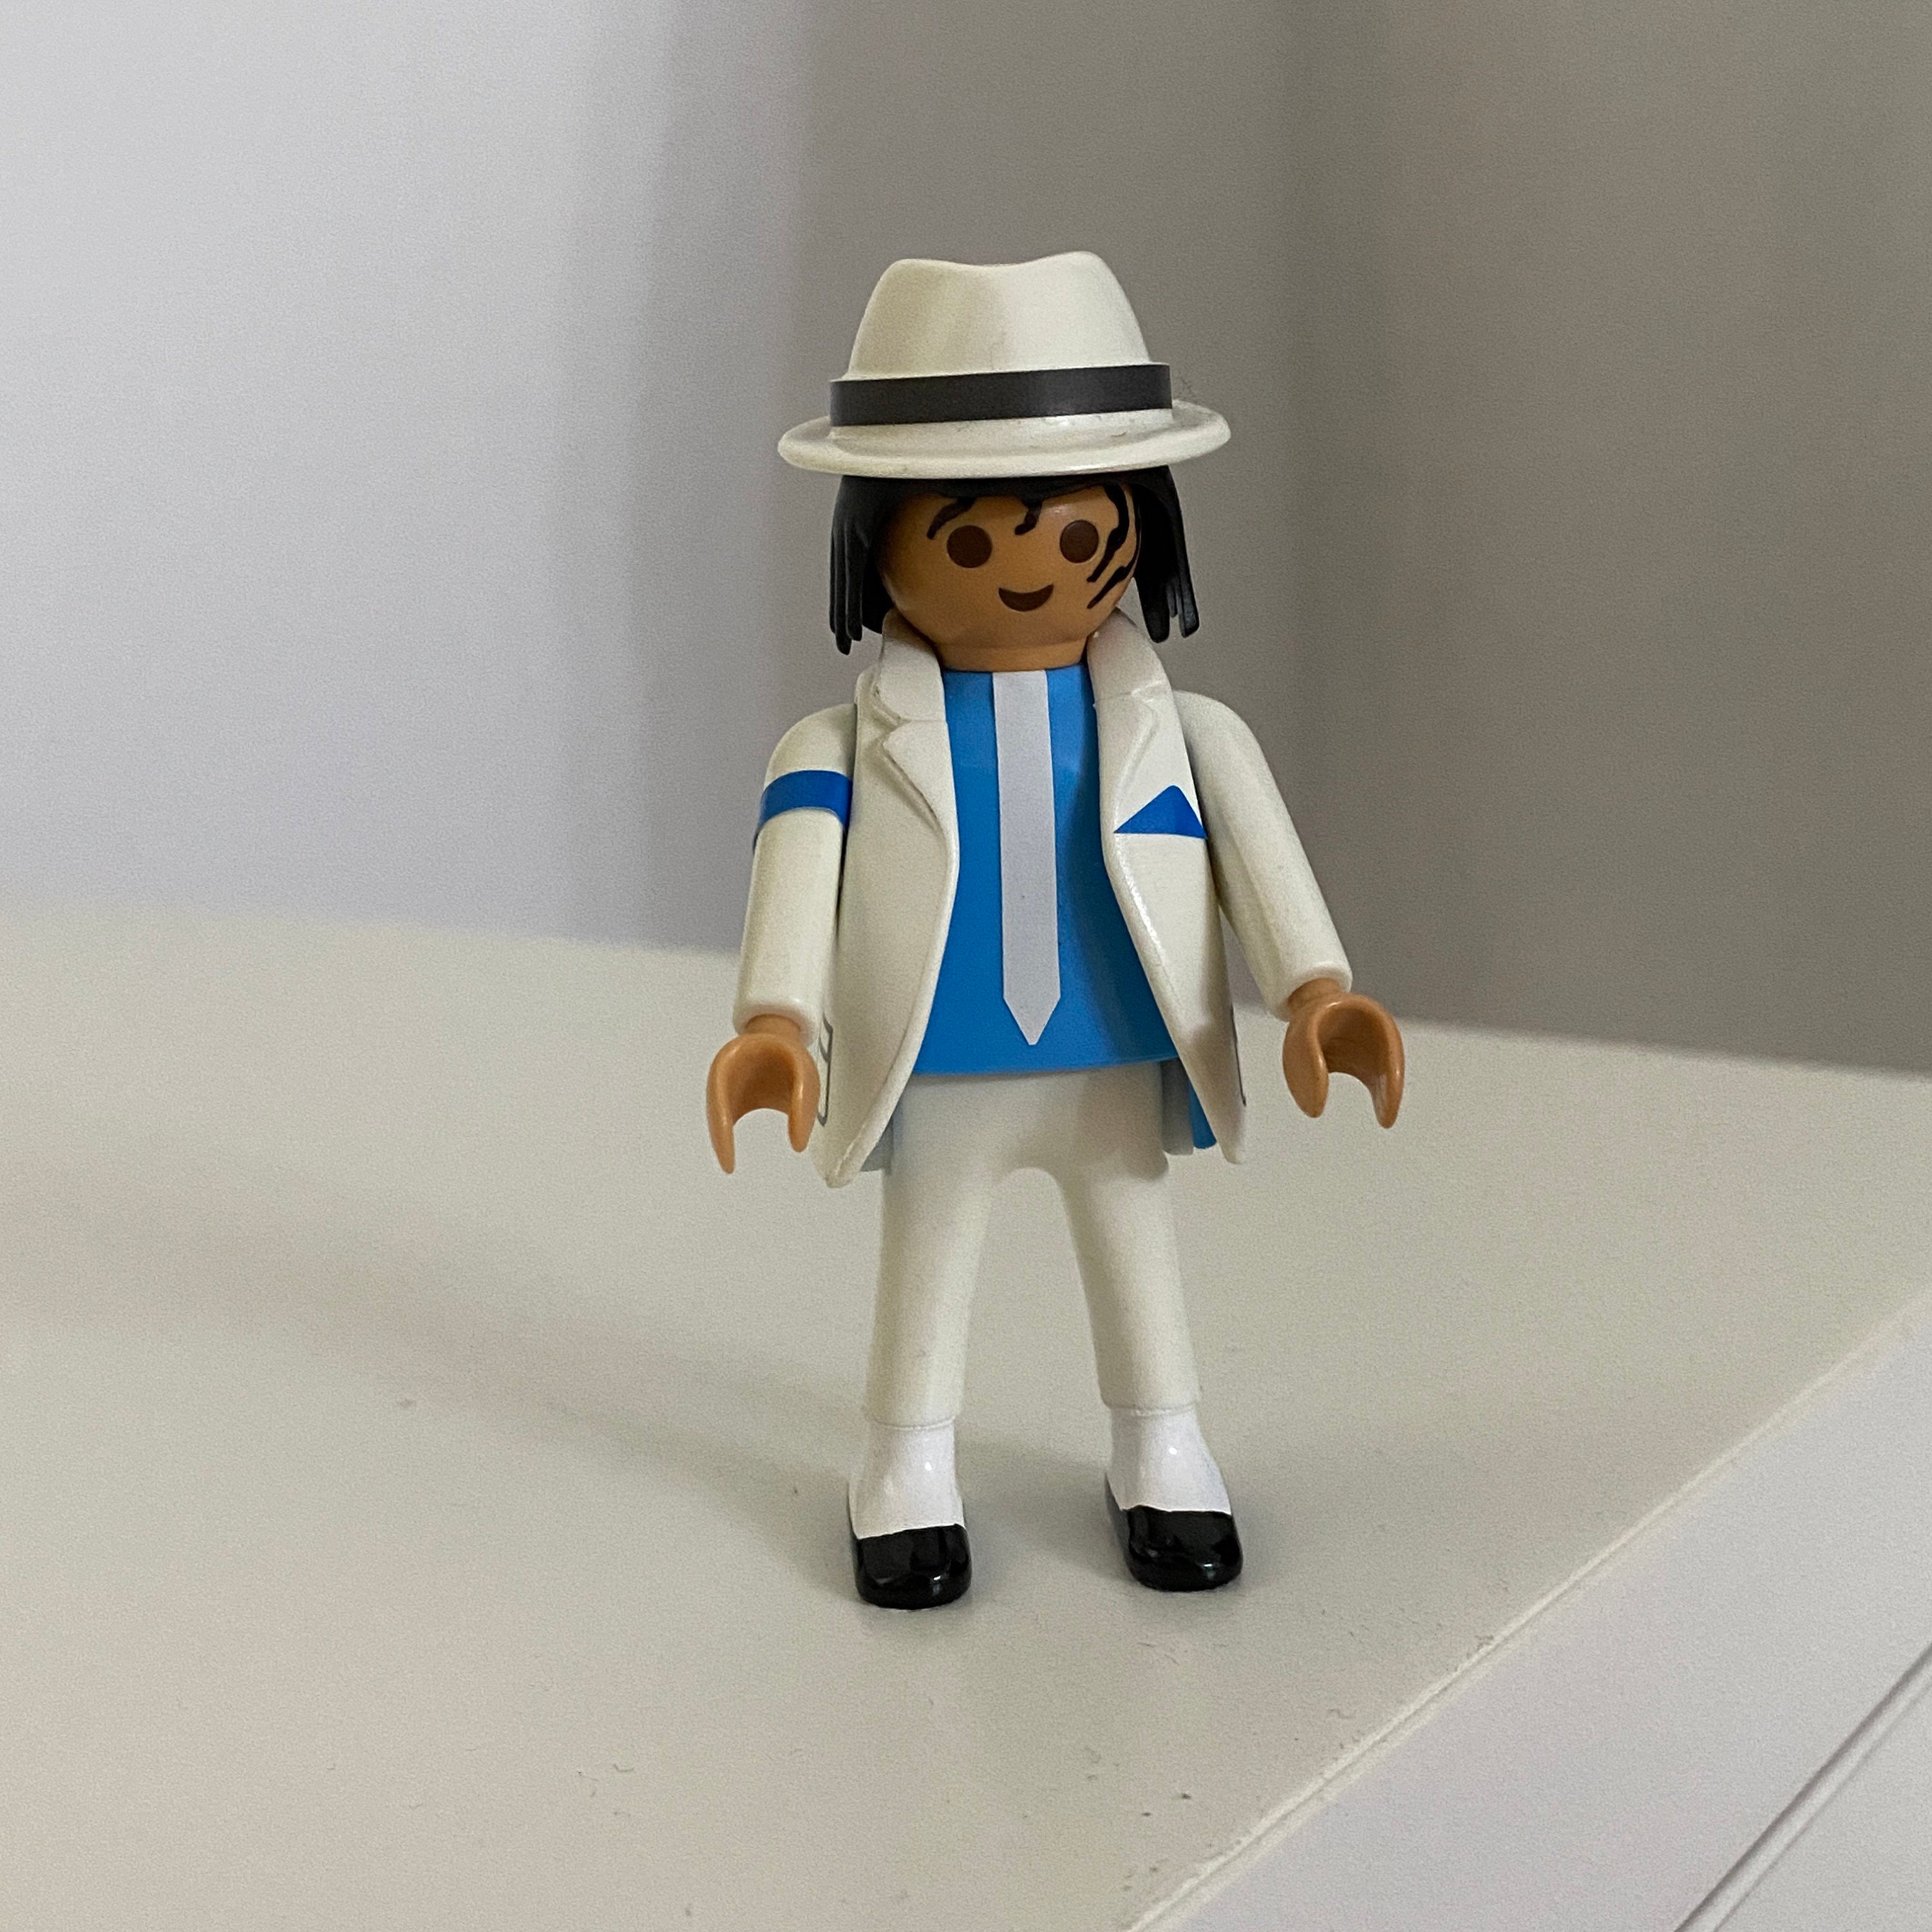 Michael Jackson Playmobil Customized Figure Playmobil Personalized  Character Collectionism -  Norway